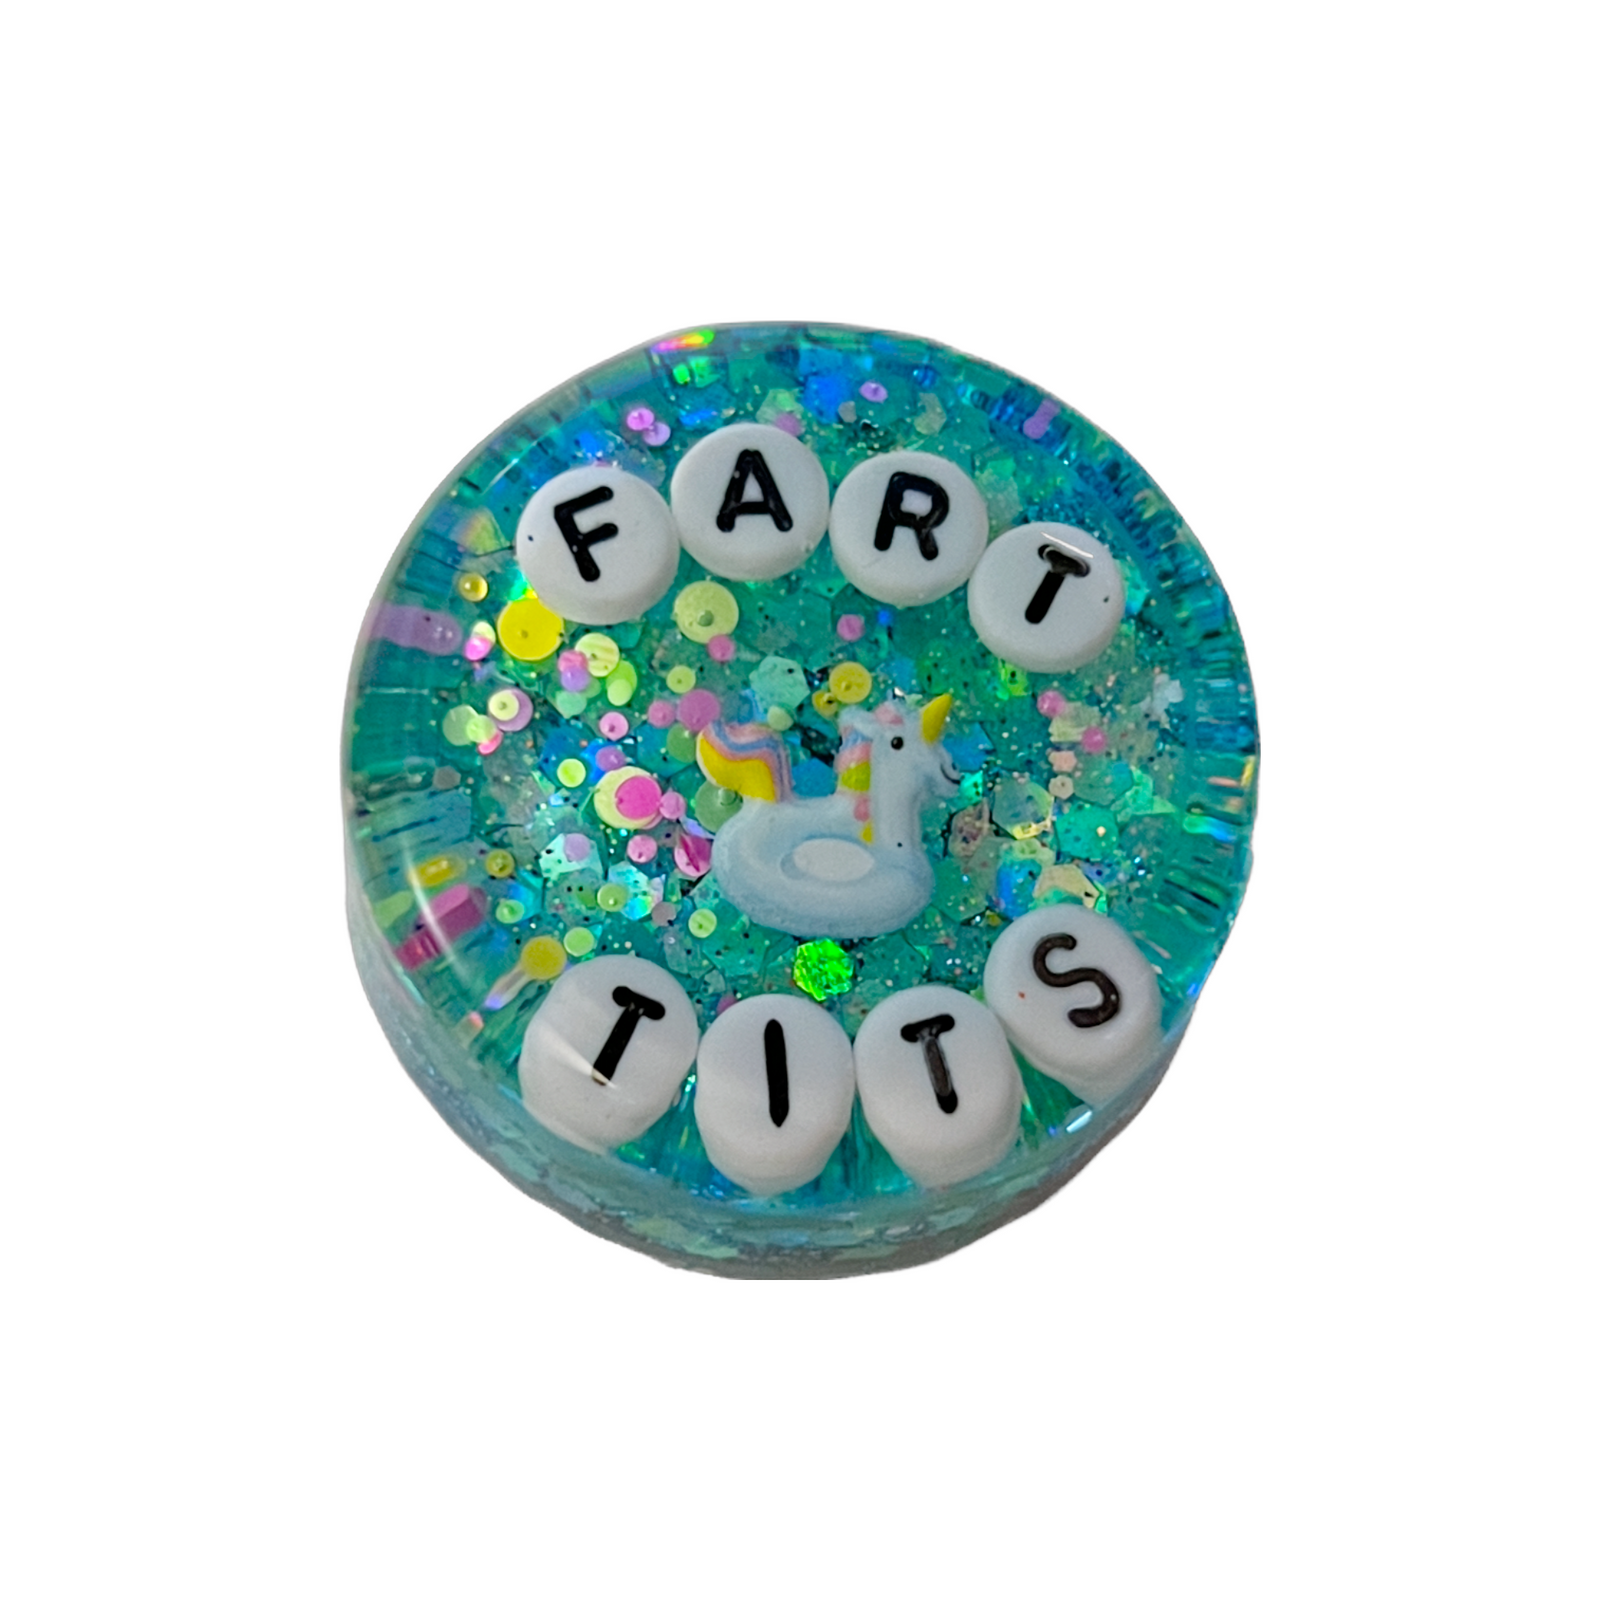 Fart Tits - Shower Art - READY TO SHIP